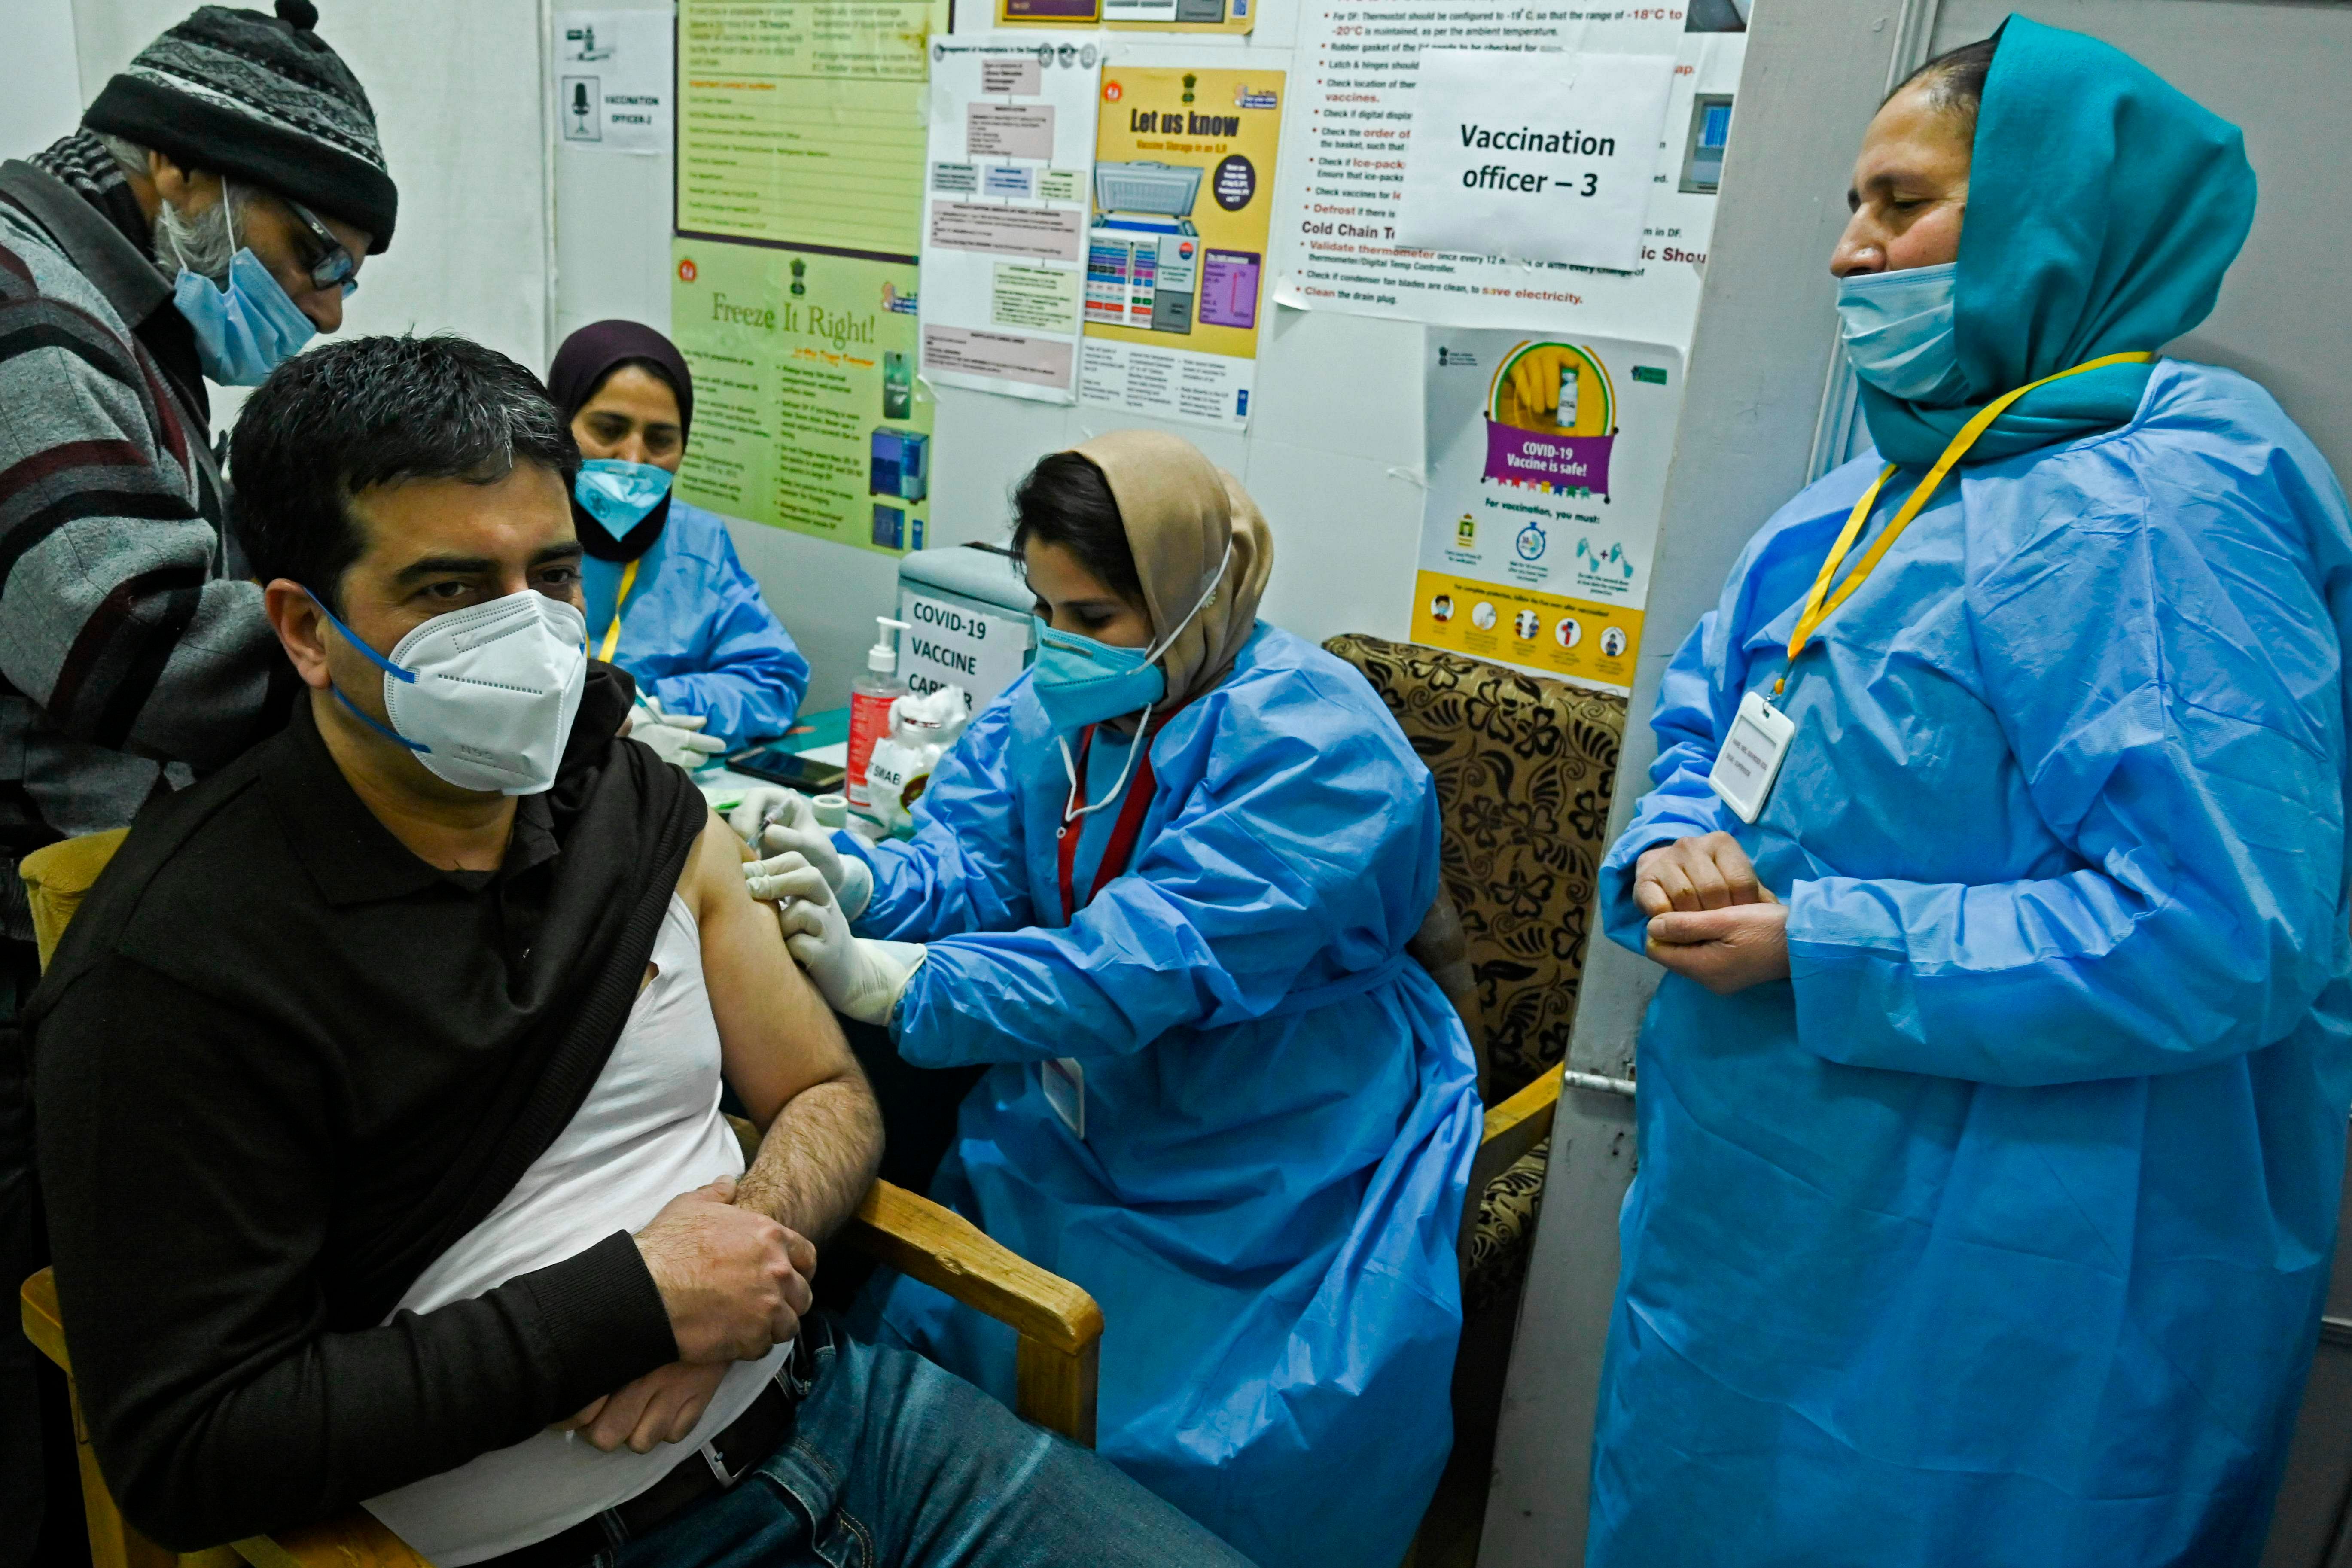 A medical worker inoculates a staff member with Covid-19 coronavirus vaccine at the G.B. Pant hospital in Srinagar on January 22, 2021. Credit: AFP Photo